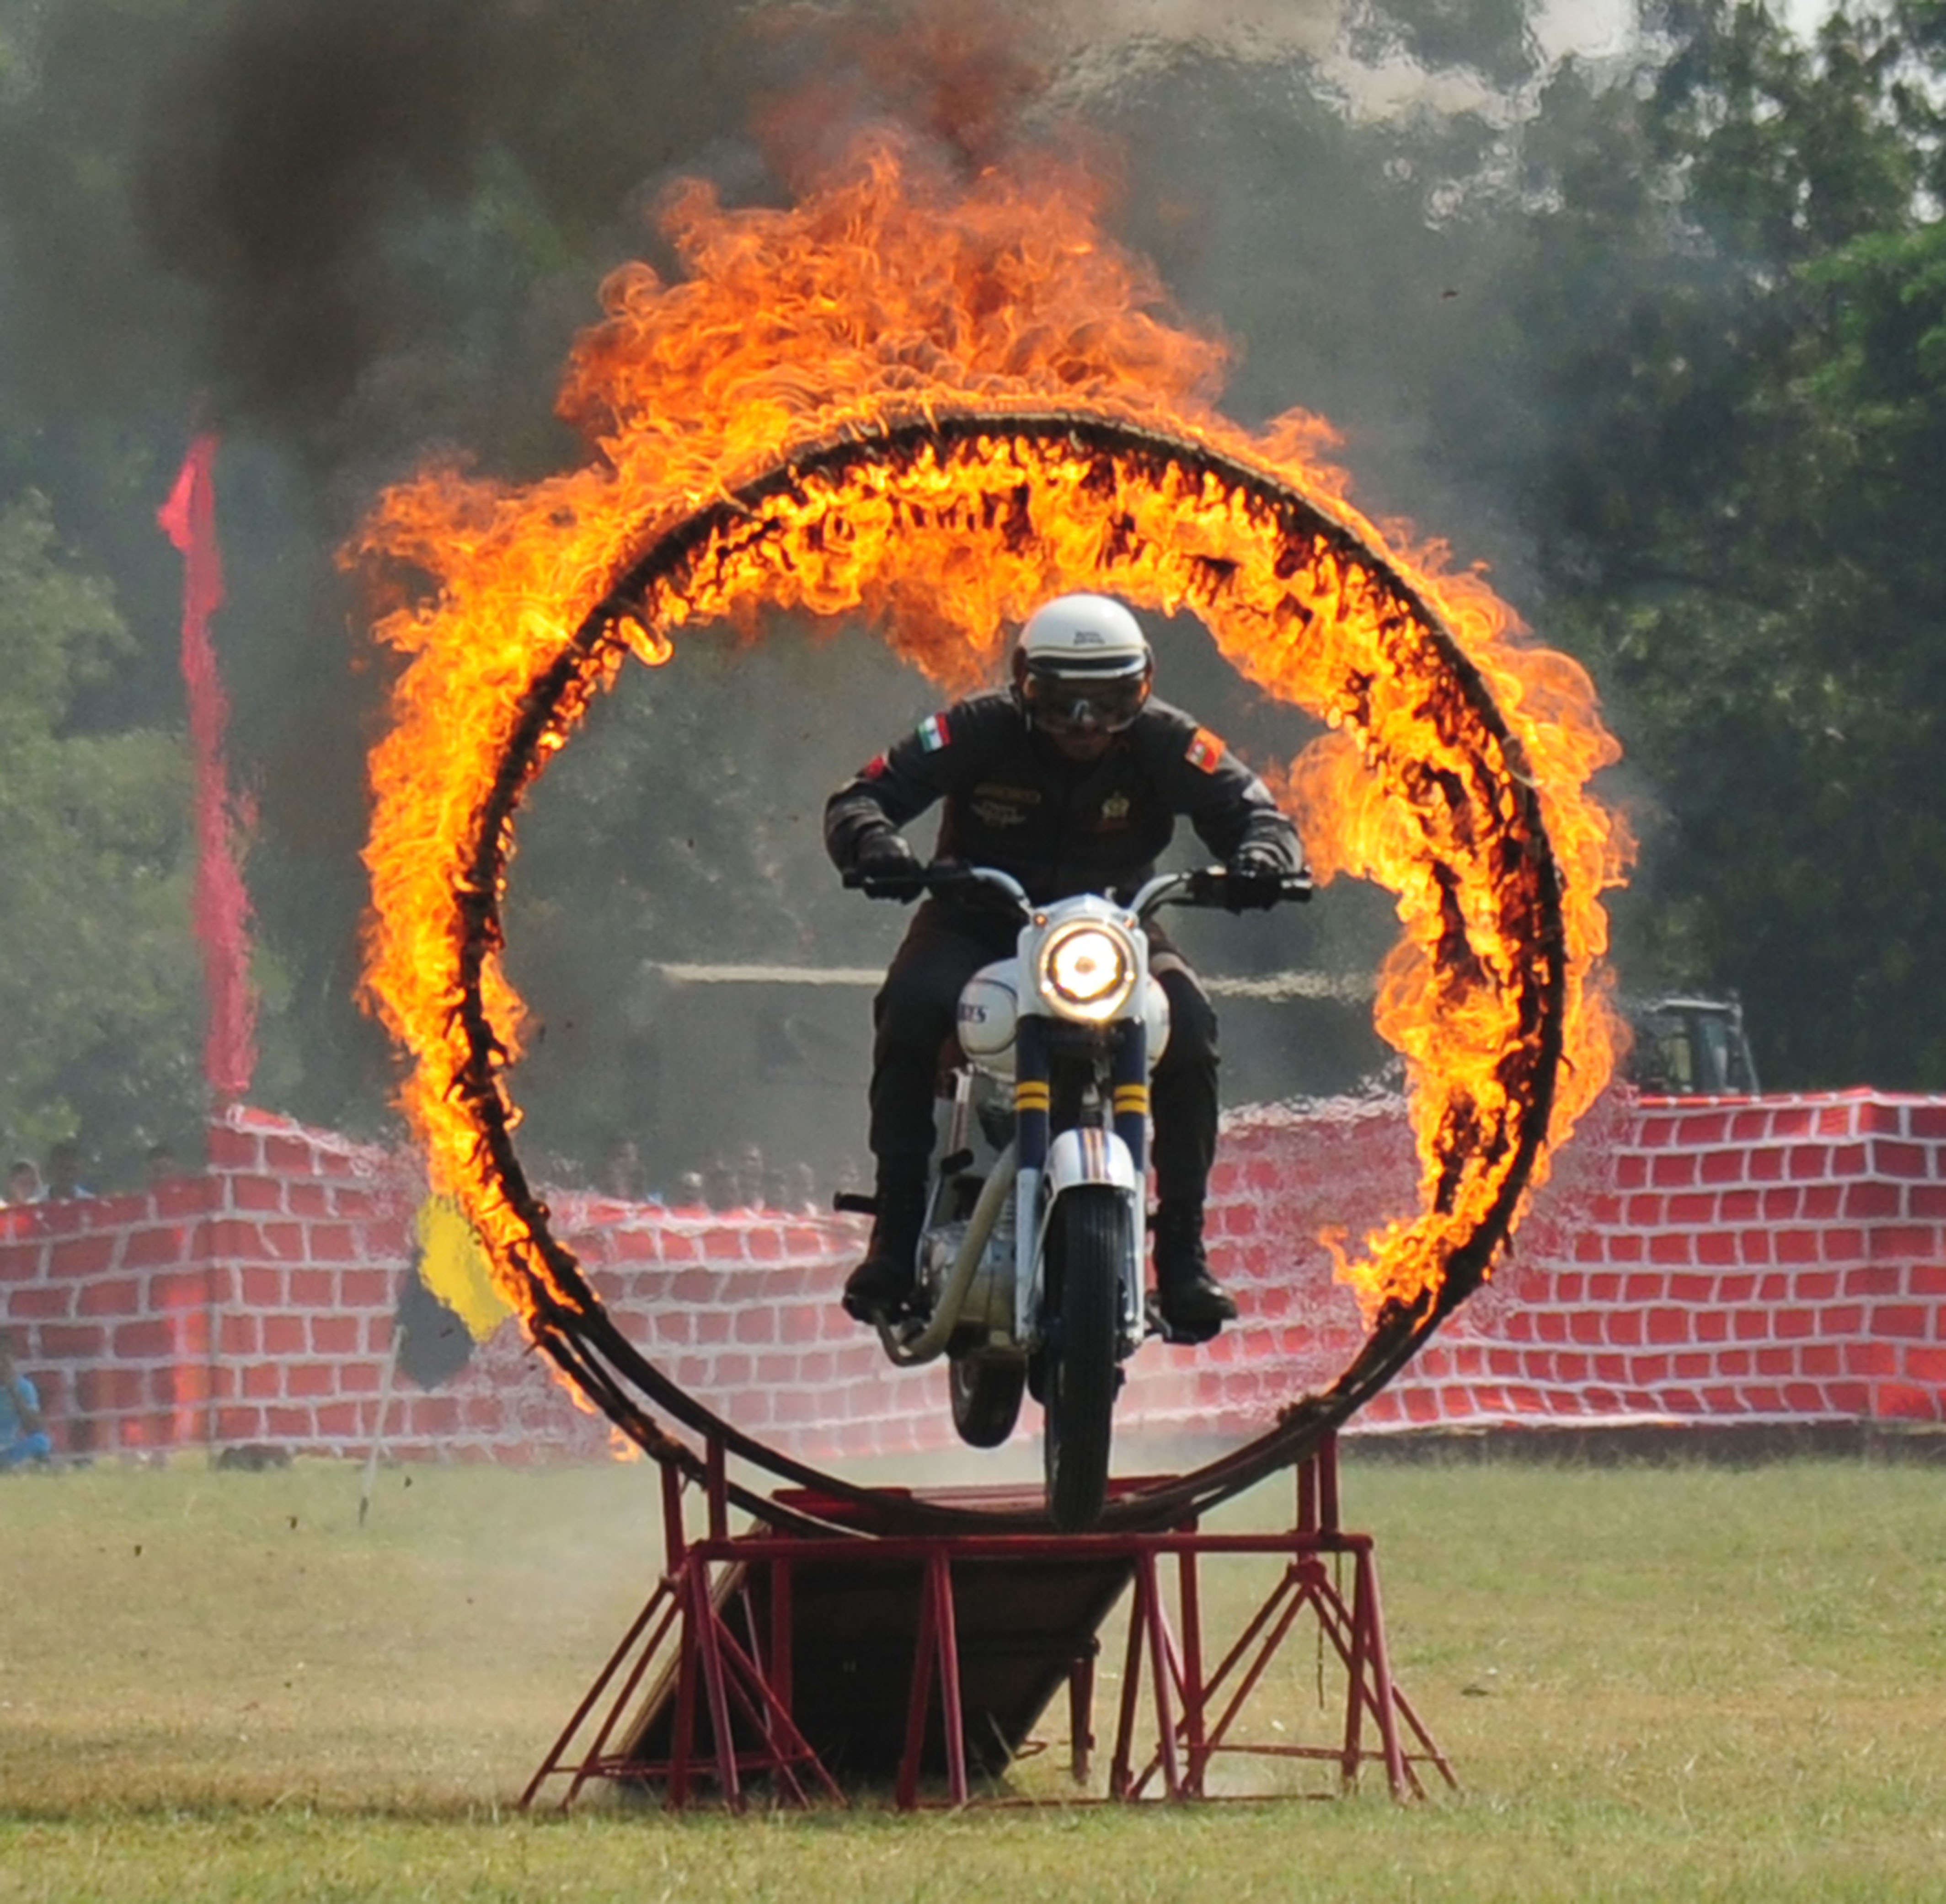 Army officer sets world record despite injury in fire tunnel bike stunt